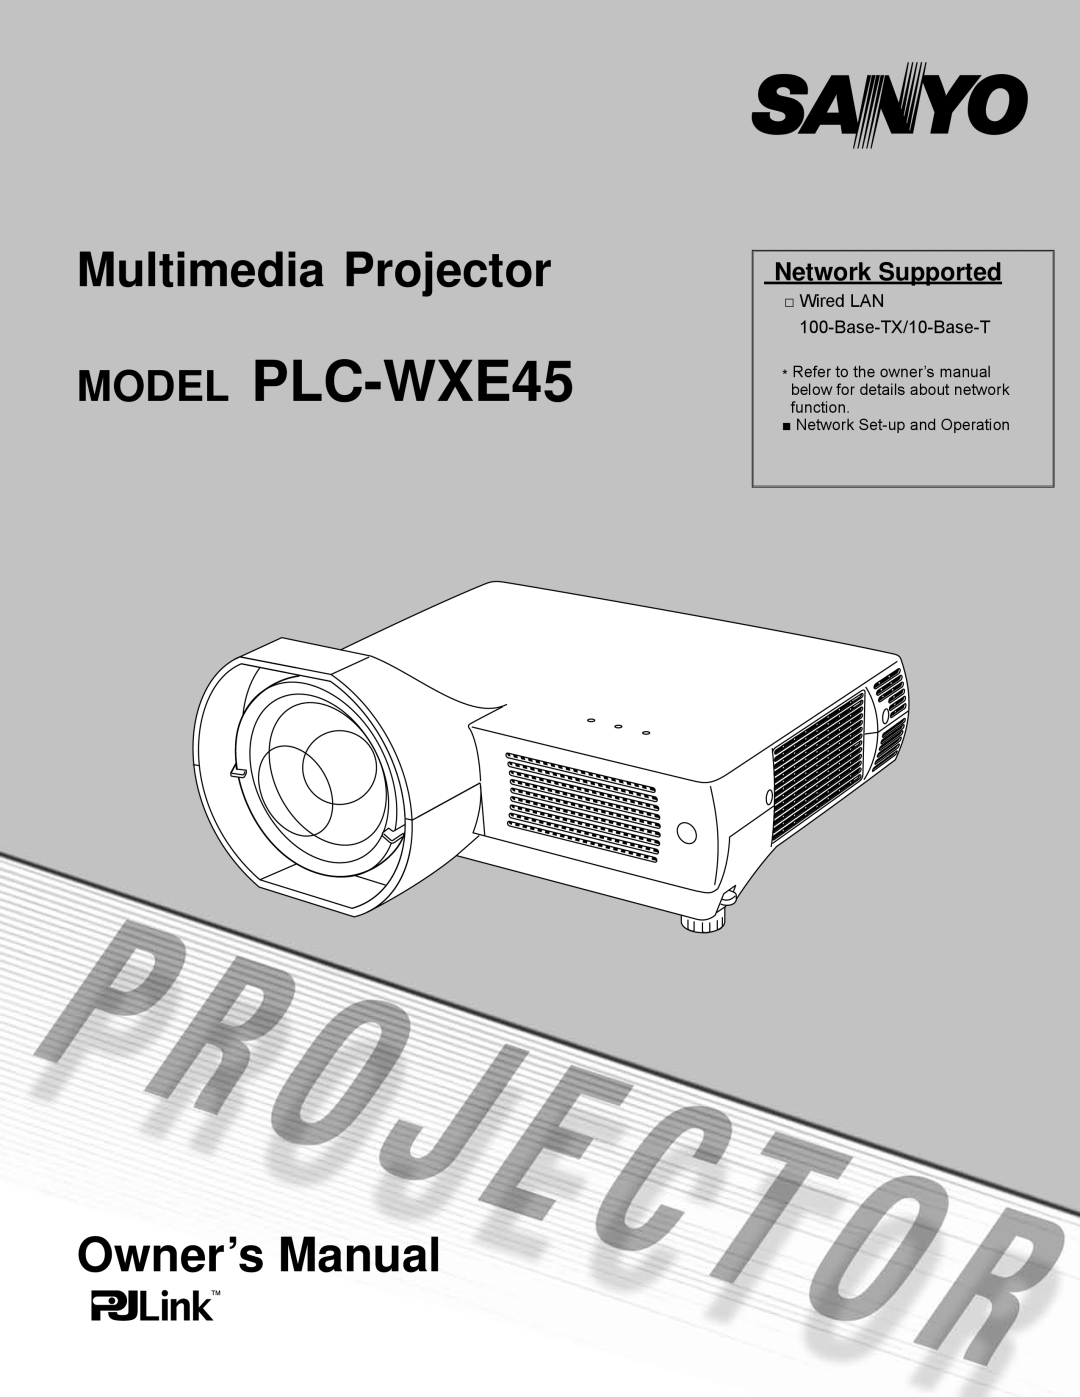 Sanyo owner manual Network Supported, MODEL PLC-WXE45, Multimedia Projector, Network Set-upand Operation 